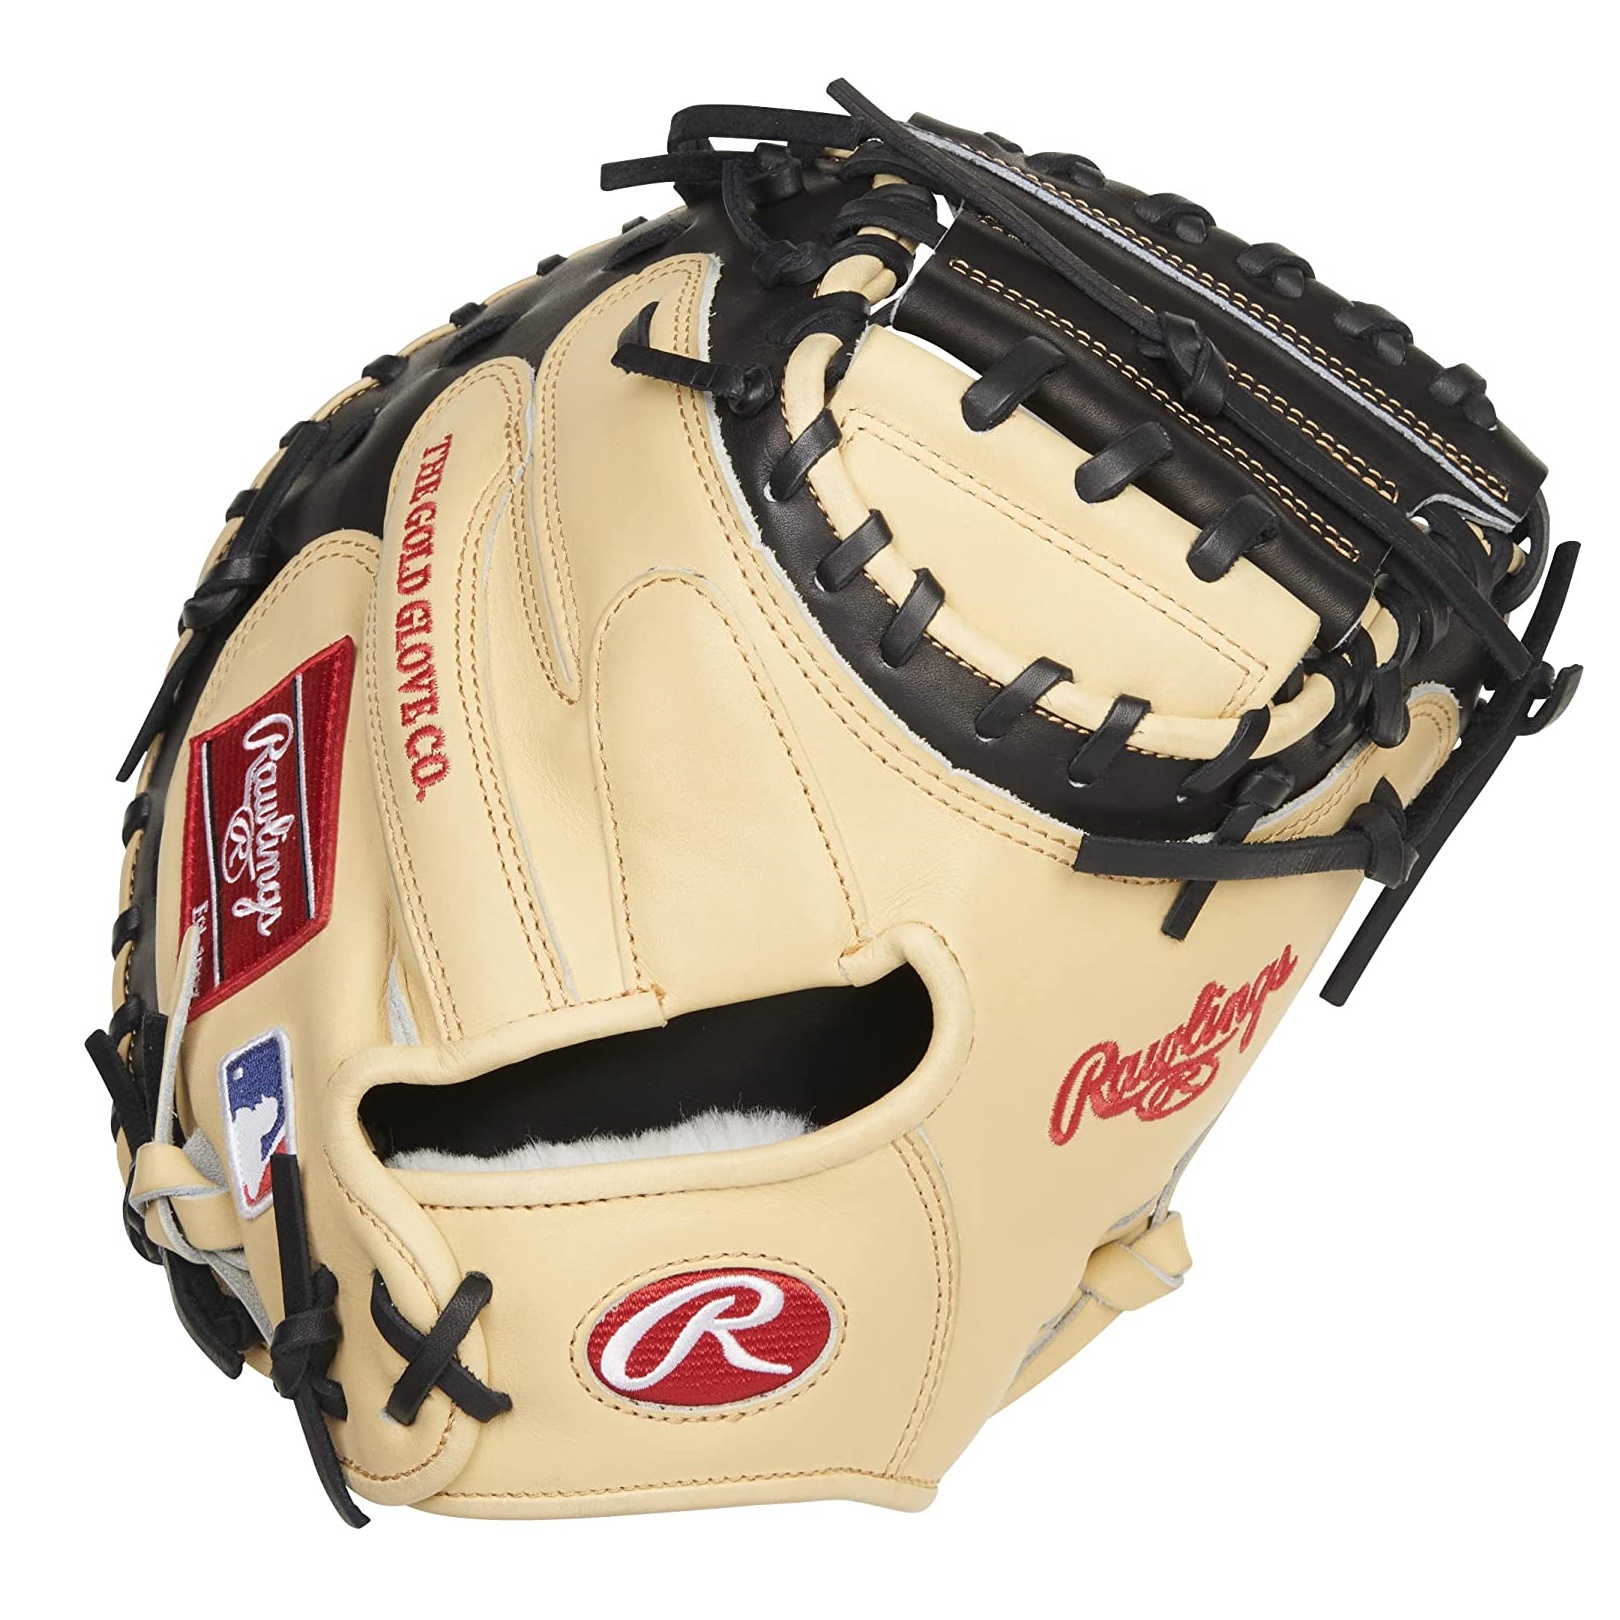 rawlings-pro-preferred-catchers-mitt-34-inch-camel-black-right-hand-throw PROSCM43CBS-RightHandThrow Rawlings  Measuring at a generous 34.00 inches this glove features a break-in